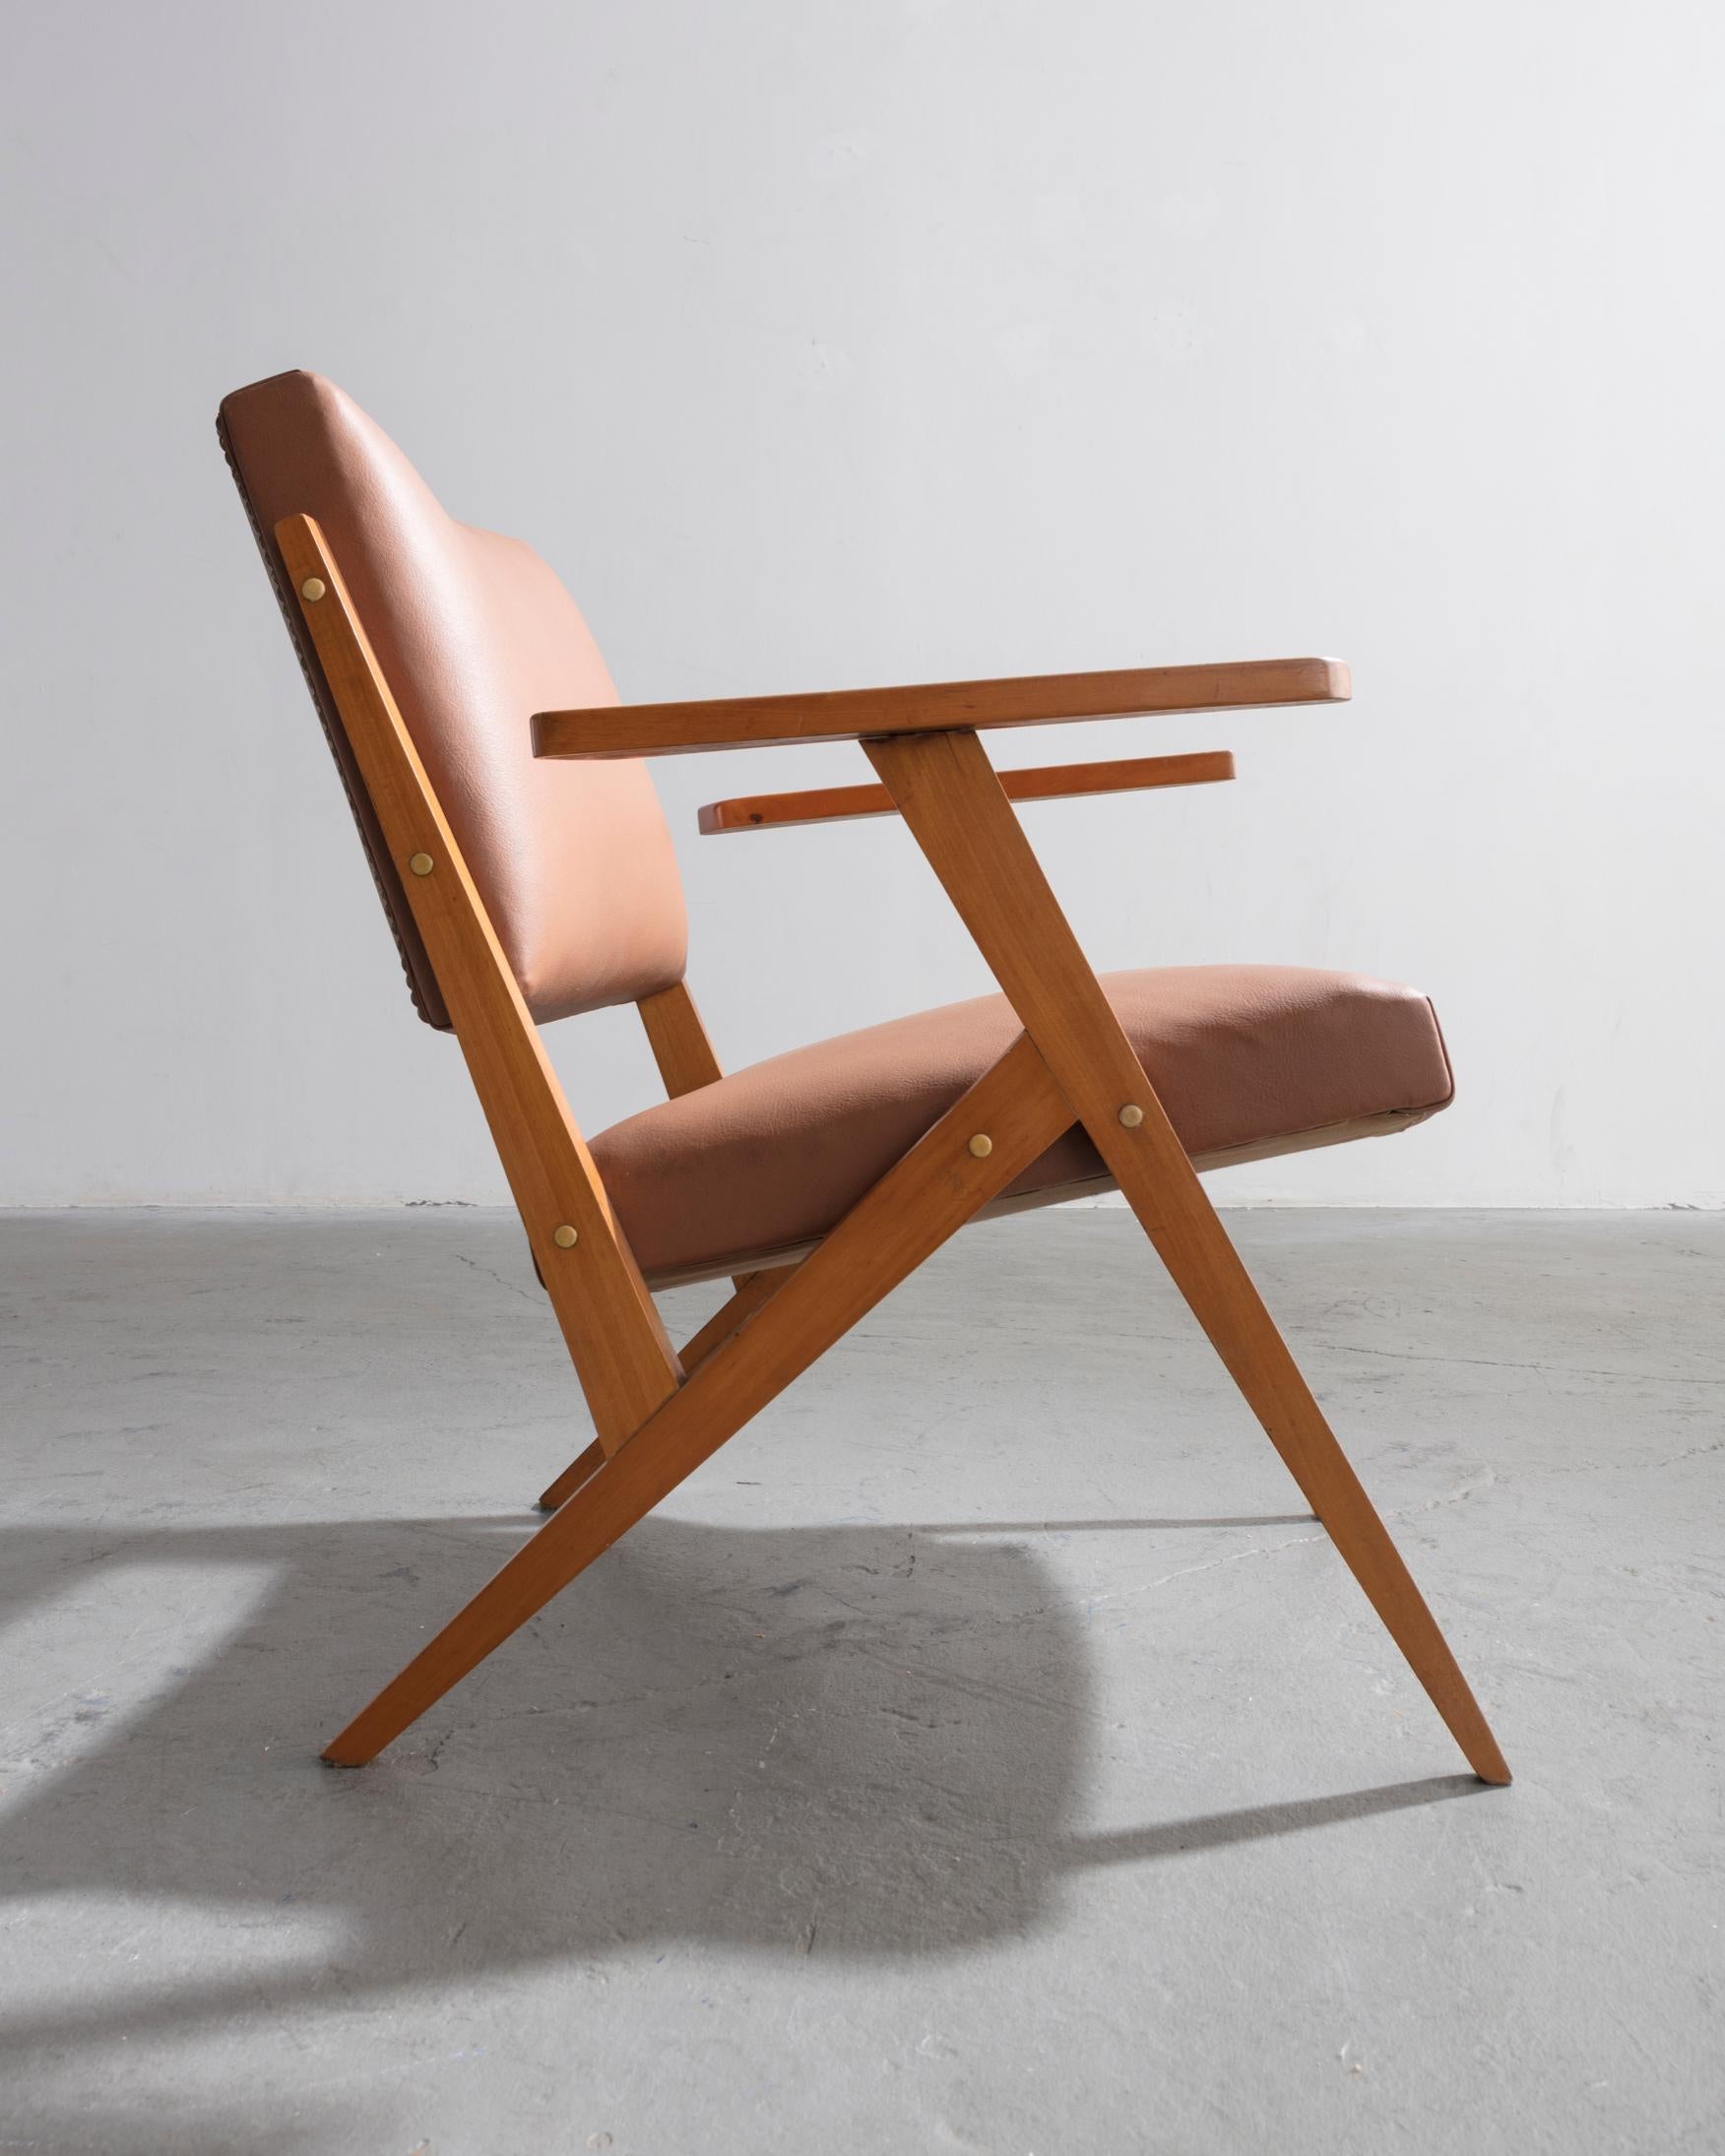 Brazilian Lounge Chair in Caviona Wood and Tan Leather by José Zanine Caldas, 1960s For Sale